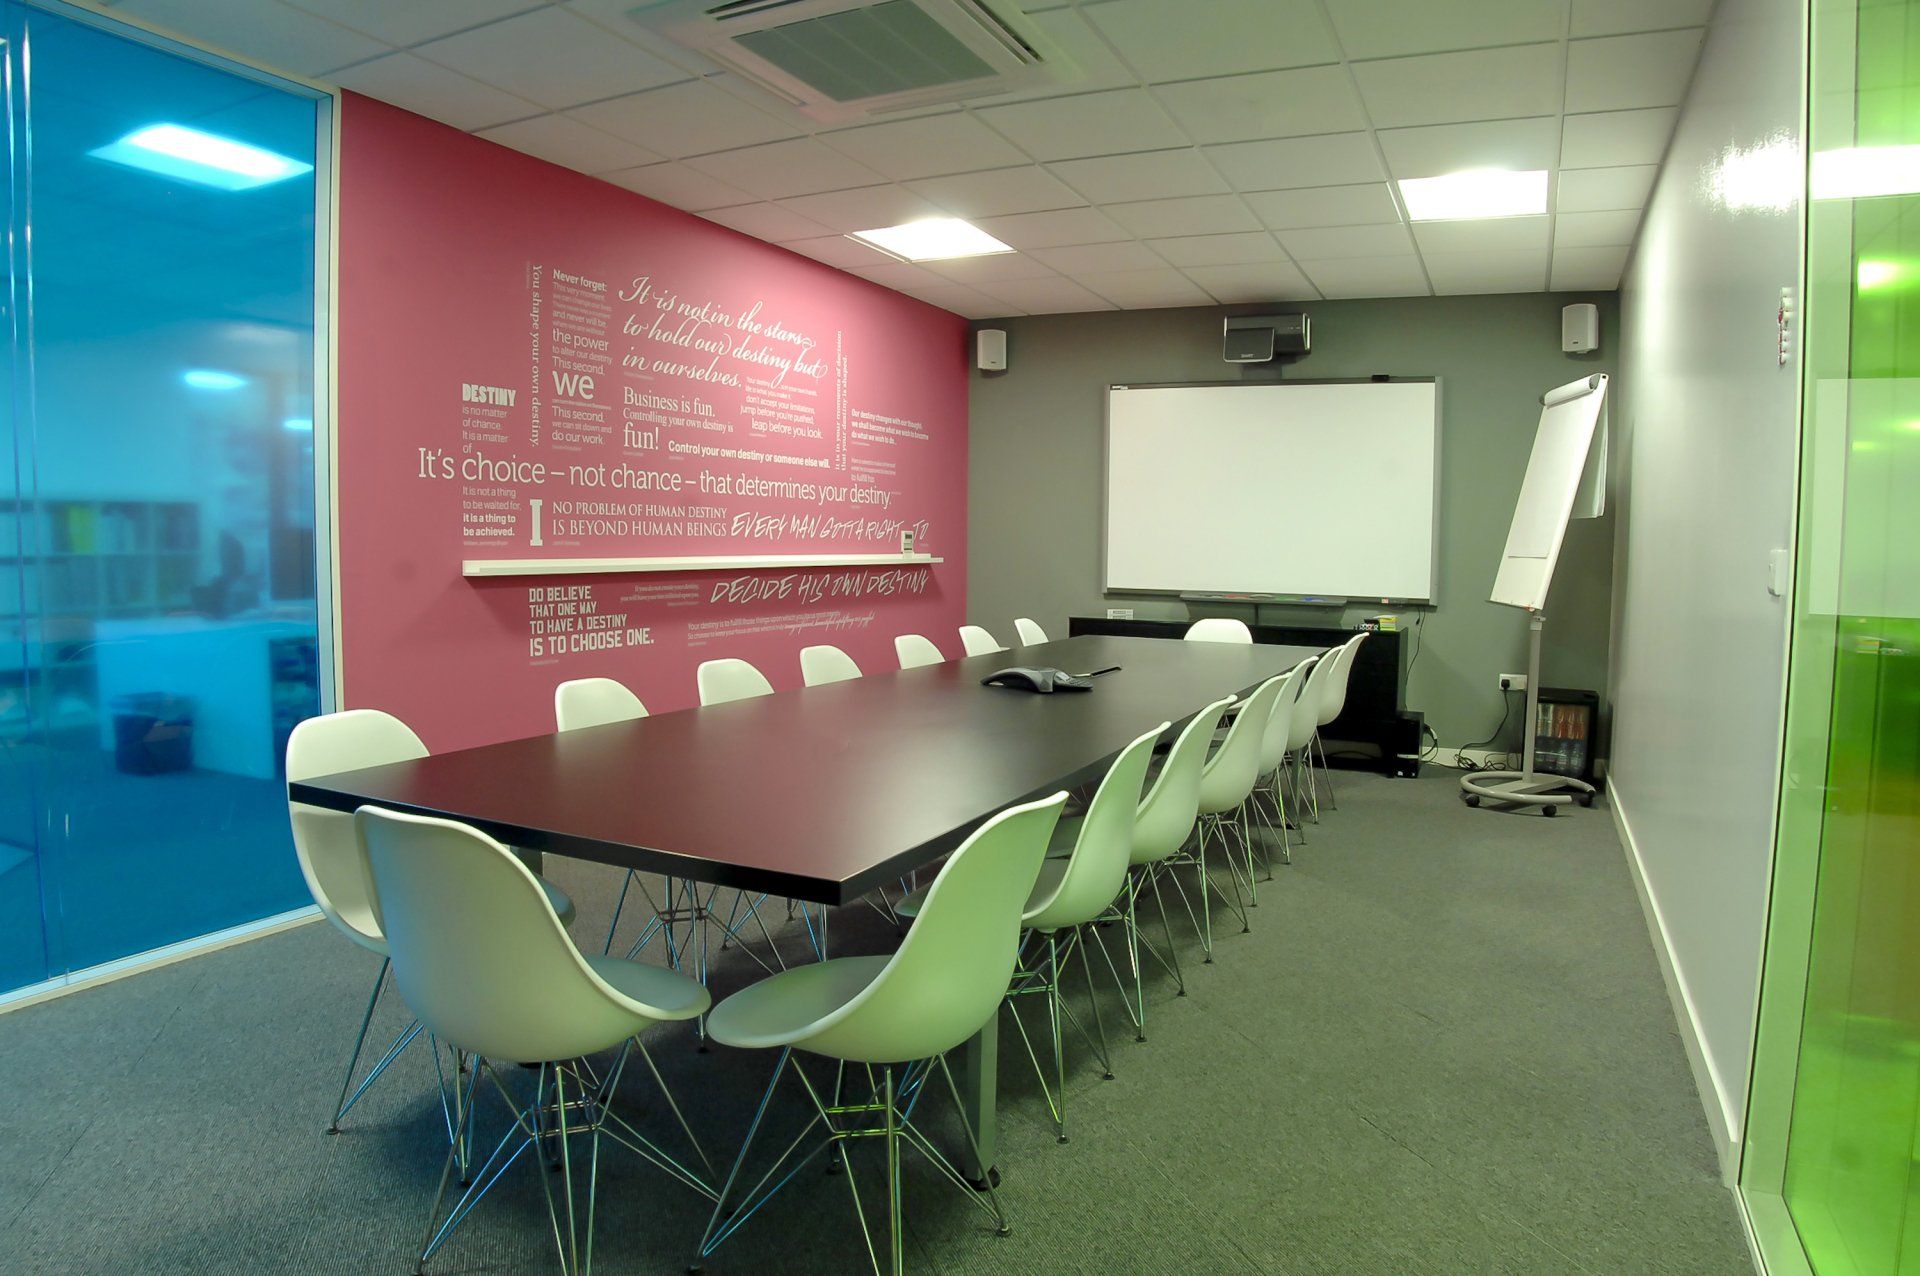 Conference room with pink feature wall by Glenside